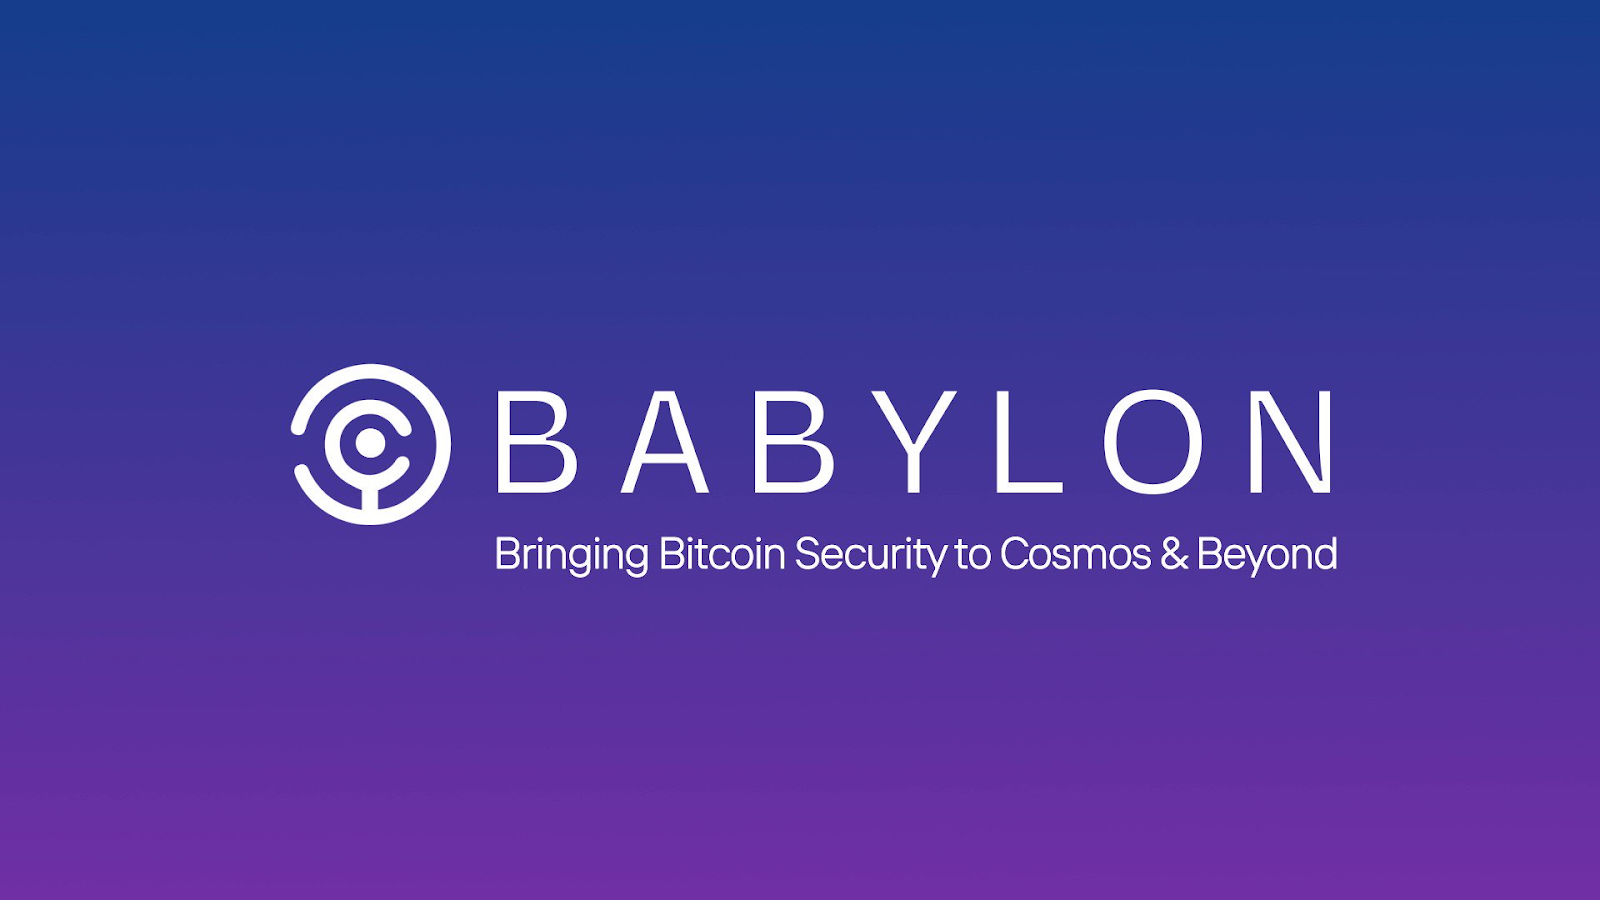 Babylon represents a game-chaining piece of architectural engineering, becoming arguably the first large blockchain platform to make use of Bitcoin’s shared security via its interoperable and modular-focused infrastructure. (Video/Image Credit: Babylon Twitter post via Babylon Twitter)